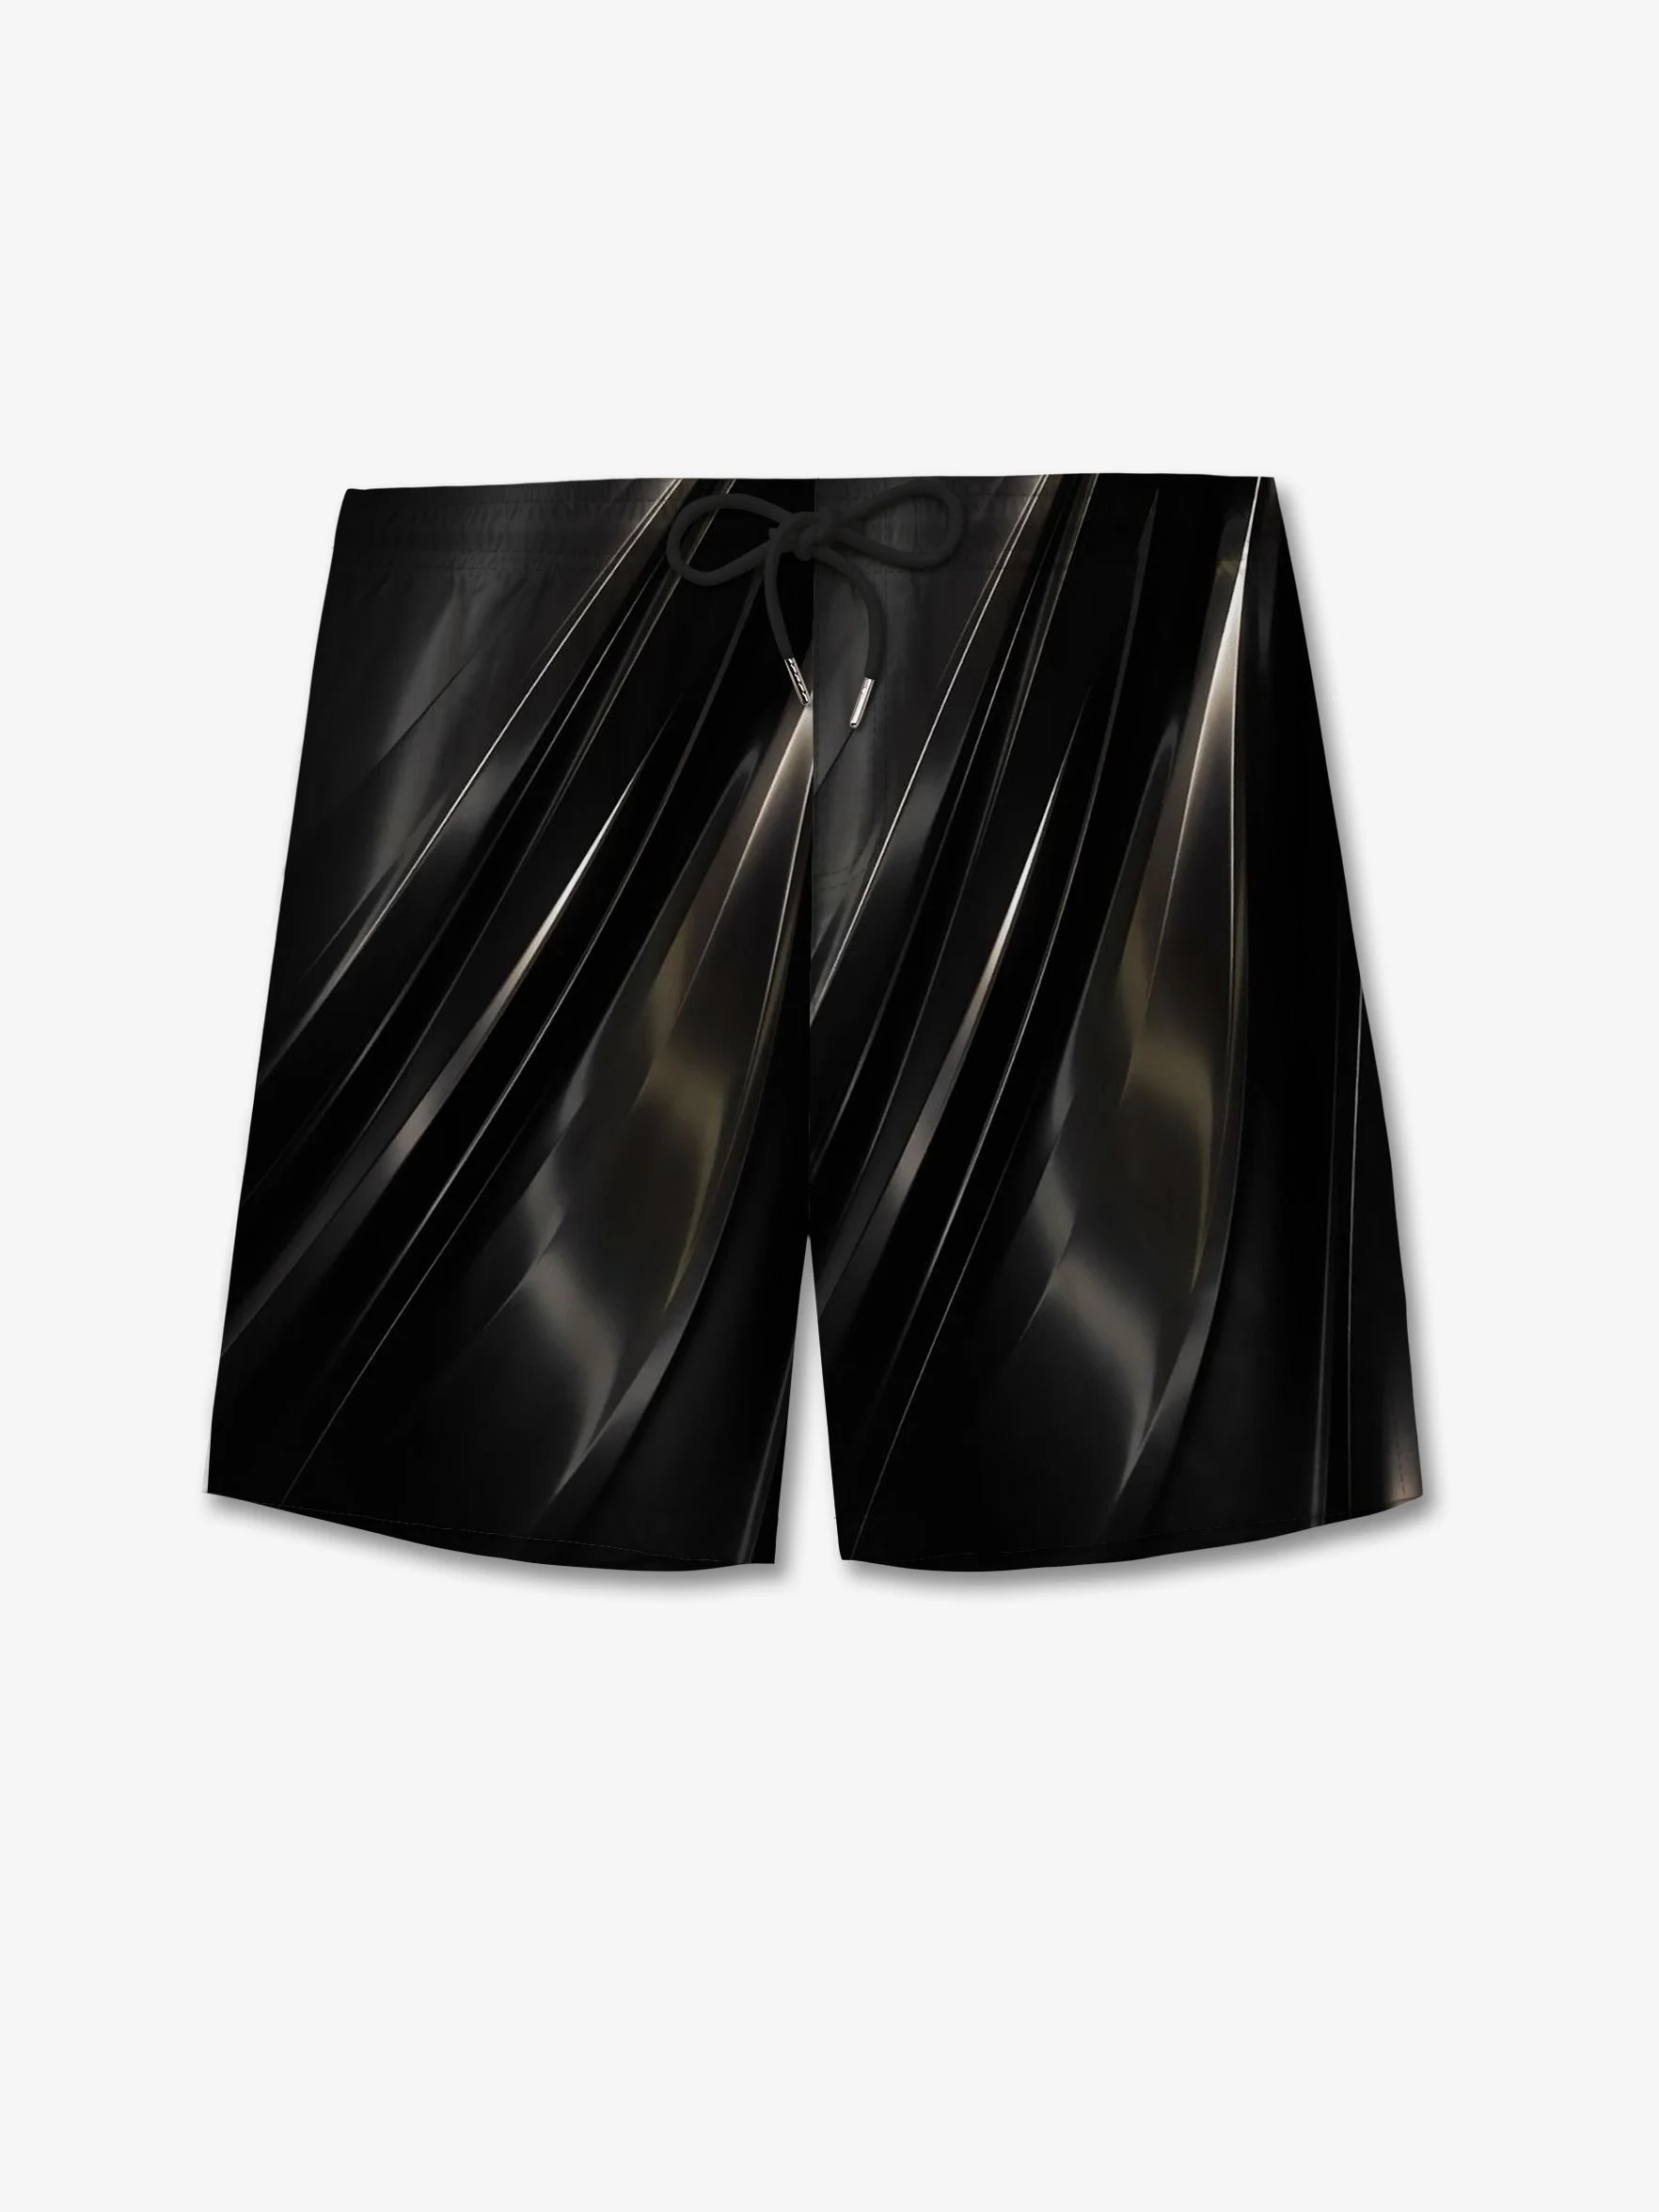 Hardaddy Quick Dry Mesh Lining Abstract 19" Boardshorts